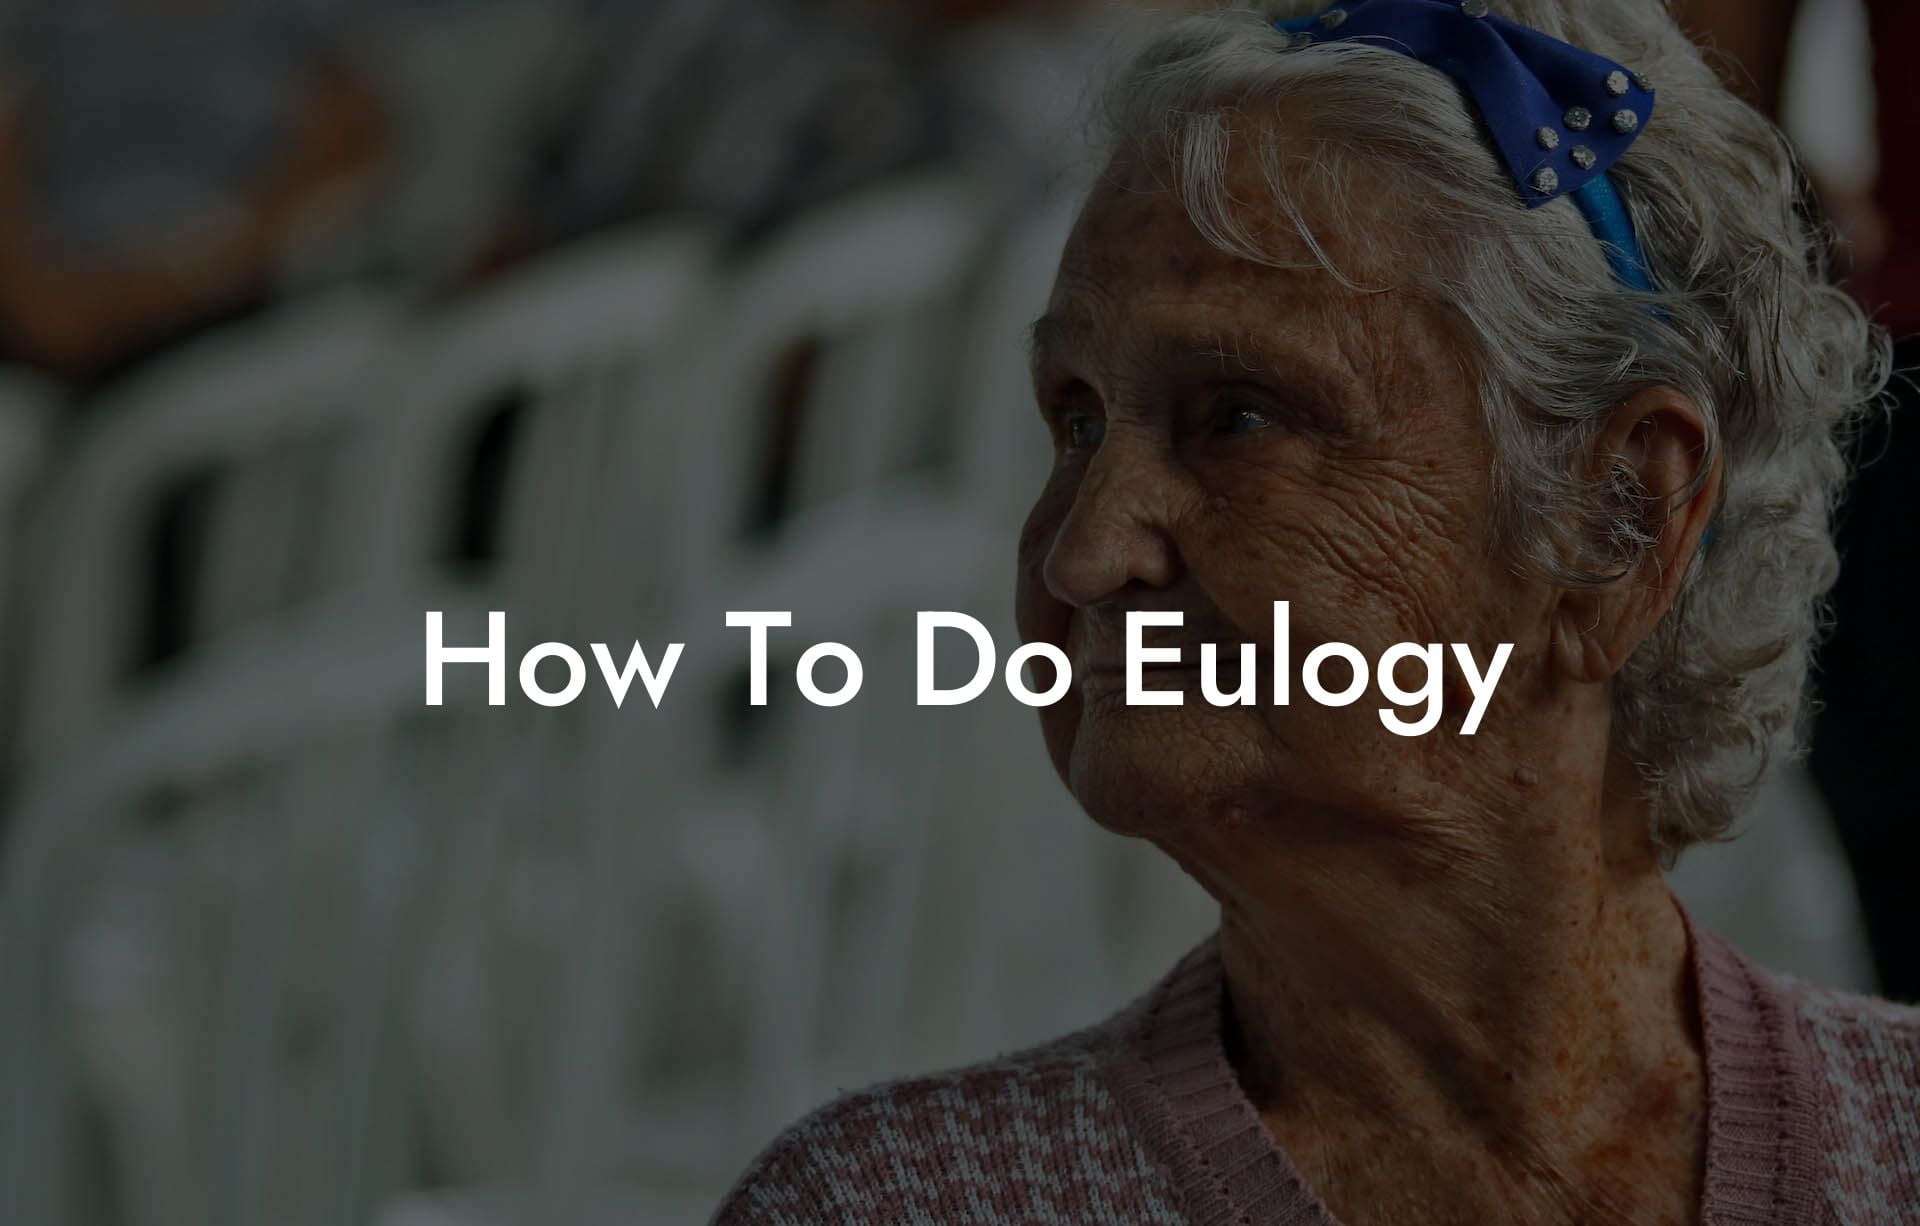 How To Do Eulogy